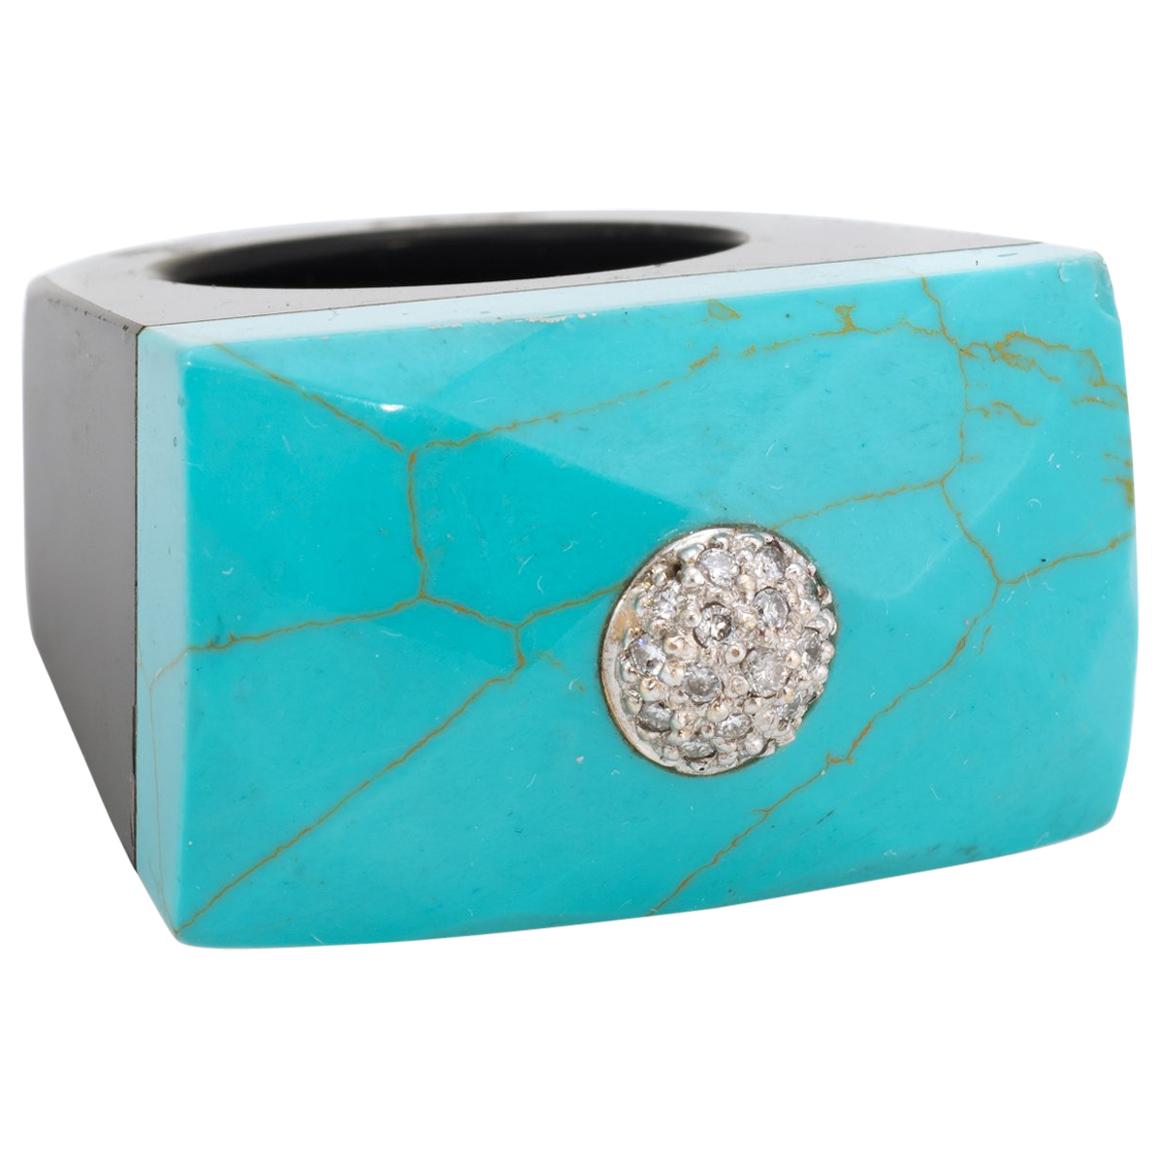 East West Turquoise Onyx Diamond Cocktail Ring 